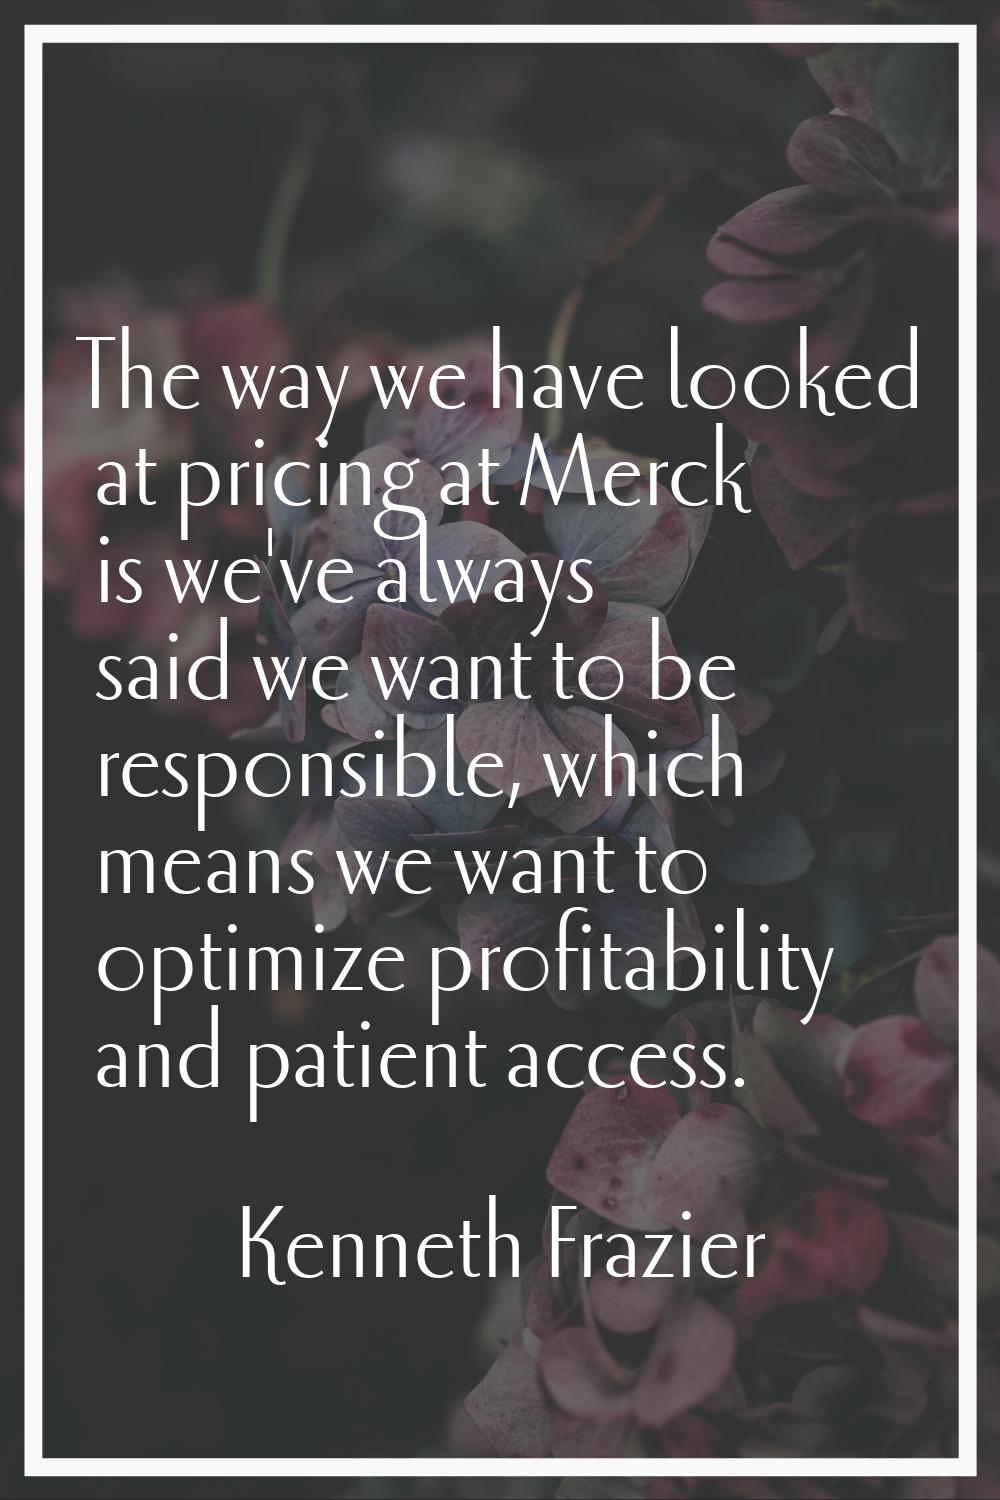 The way we have looked at pricing at Merck is we've always said we want to be responsible, which me